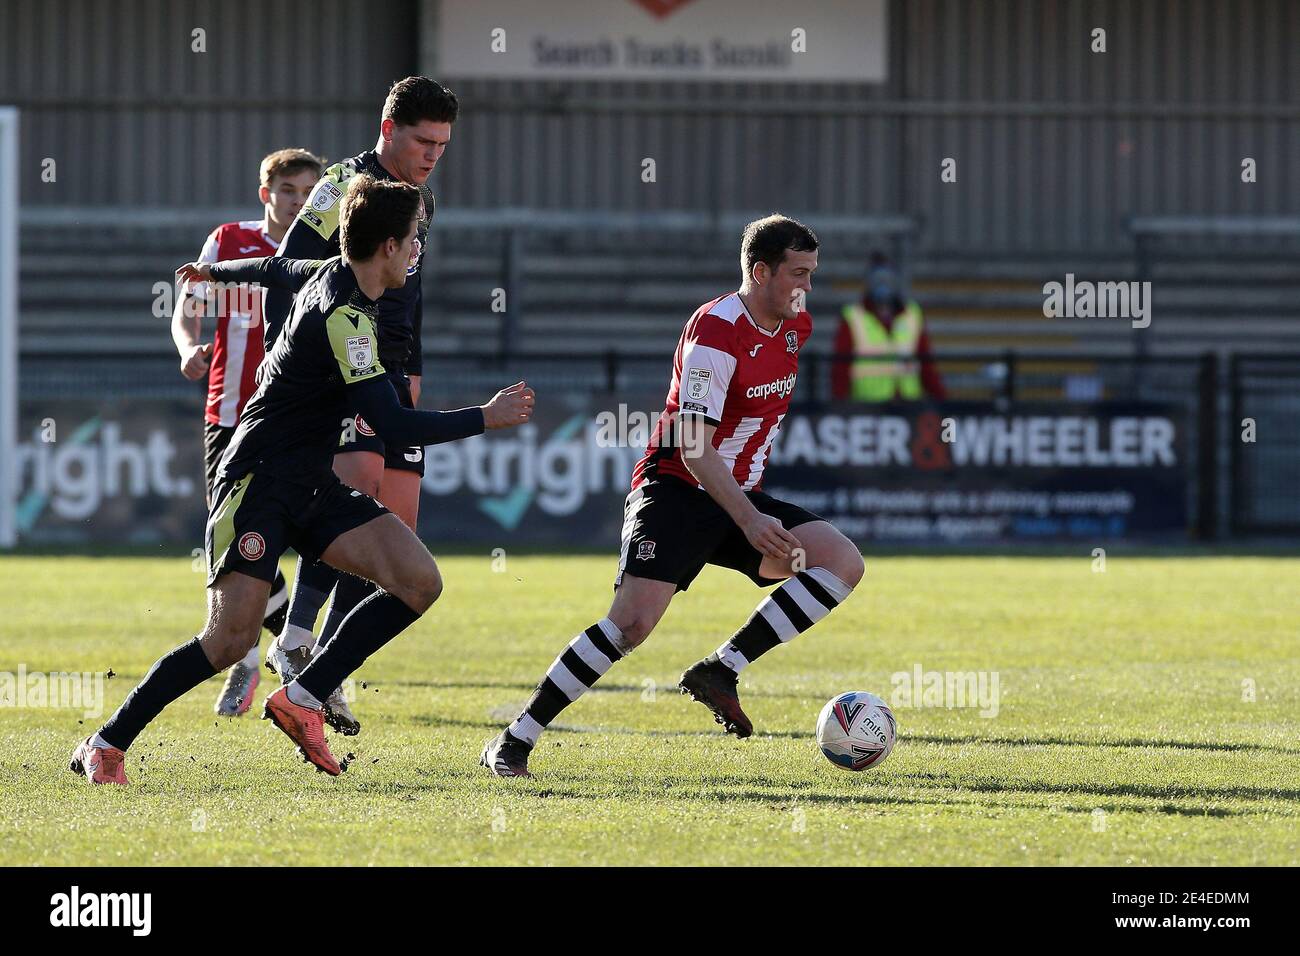 Exeter, UK. 23rd Jan, 2021. Pierce Sweeney of Exeter City during the Sky Bet League 2 behind closed doors match between Exeter City and Stevenage at St James' Park, Exeter, England on 23 January 2021. Photo by Dave Peters/PRiME Media Images. Credit: PRiME Media Images/Alamy Live News Stock Photo